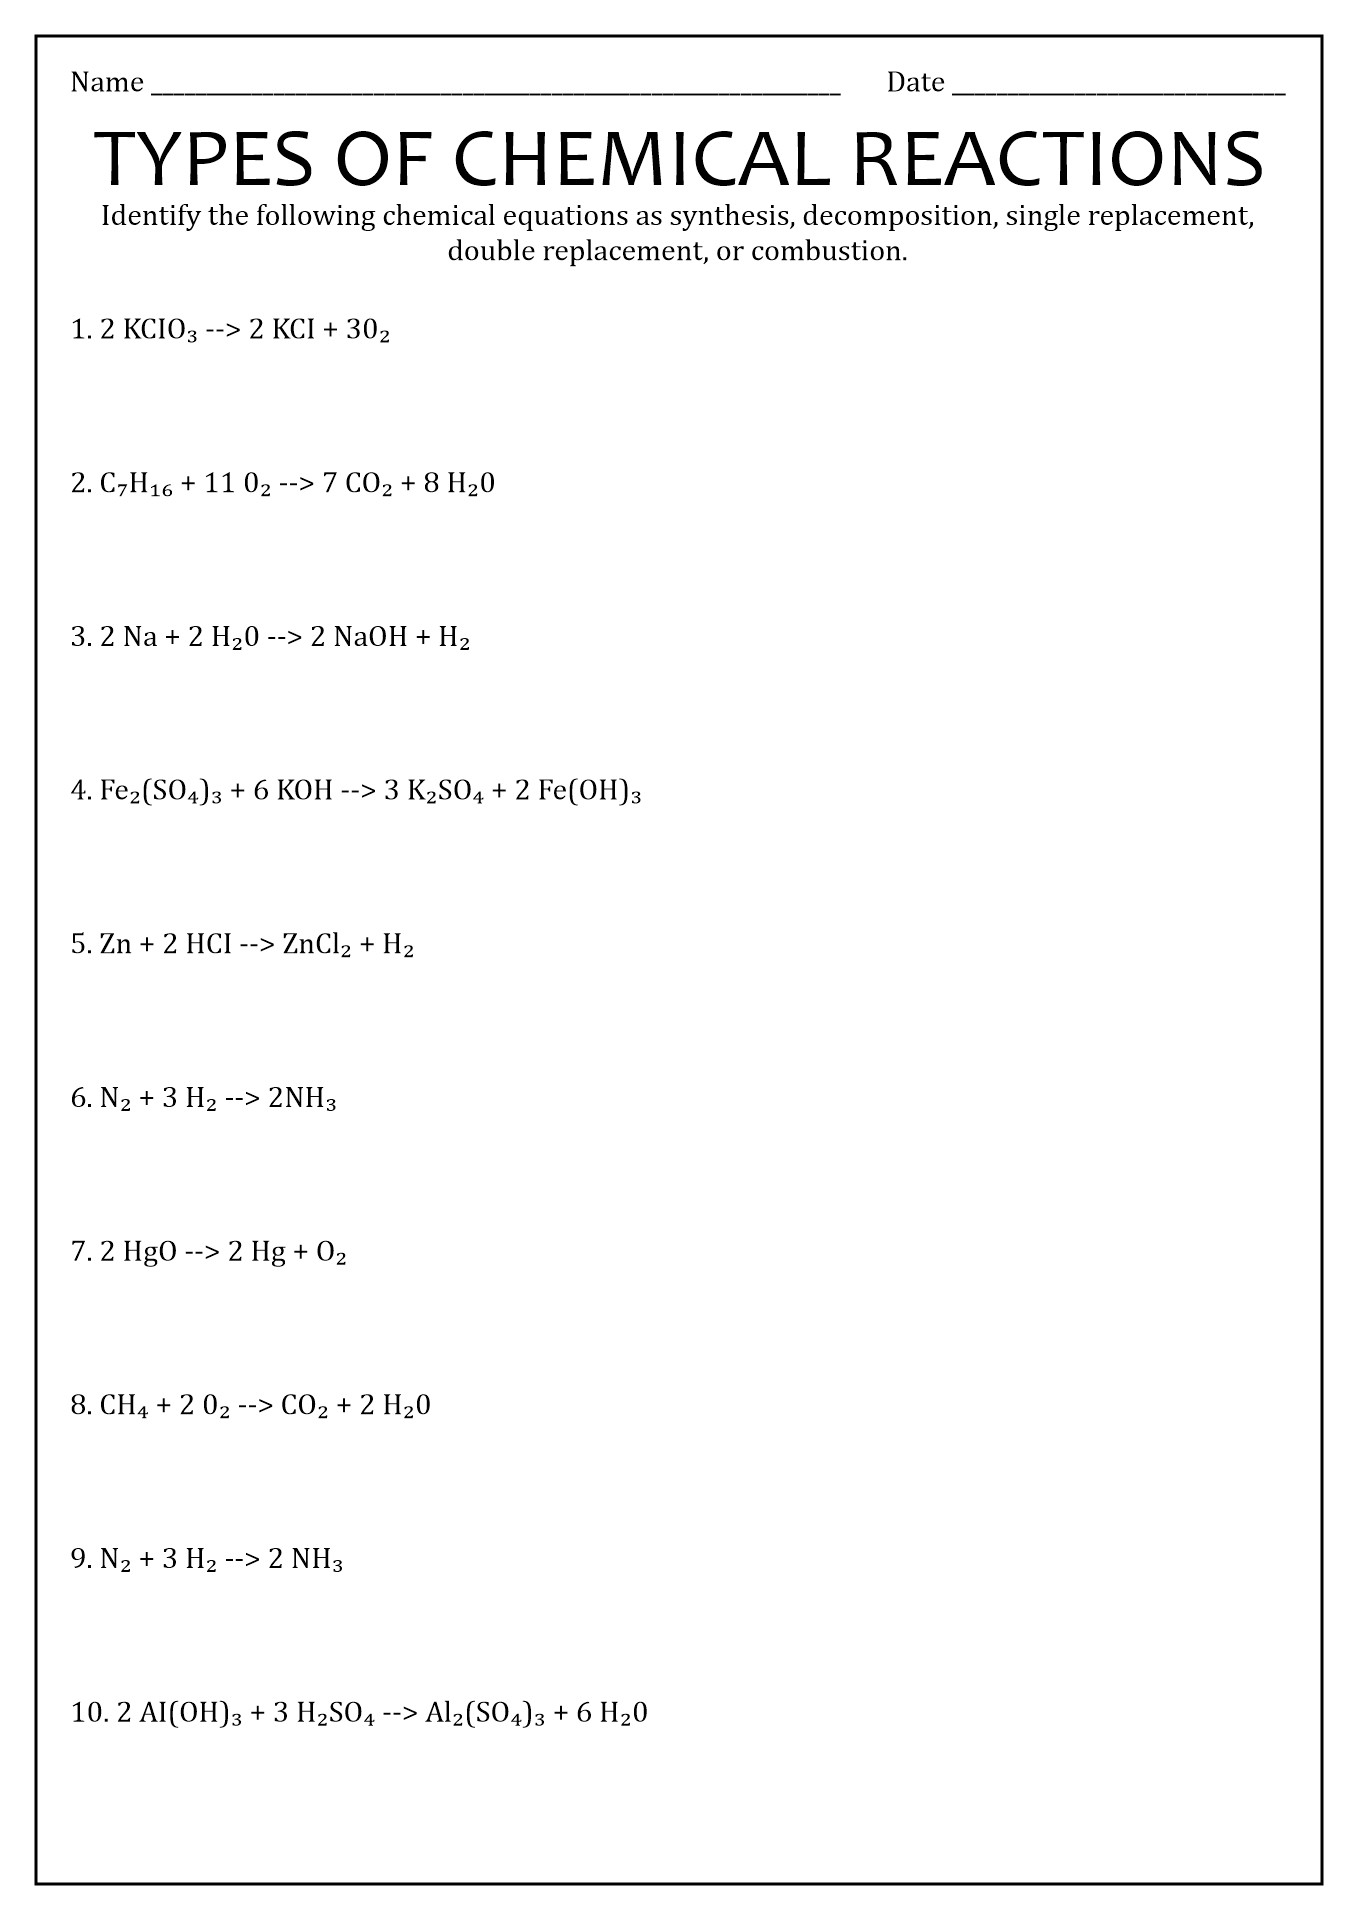 16-best-images-of-types-chemical-reactions-worksheets-answers-types-of-chemical-reactions